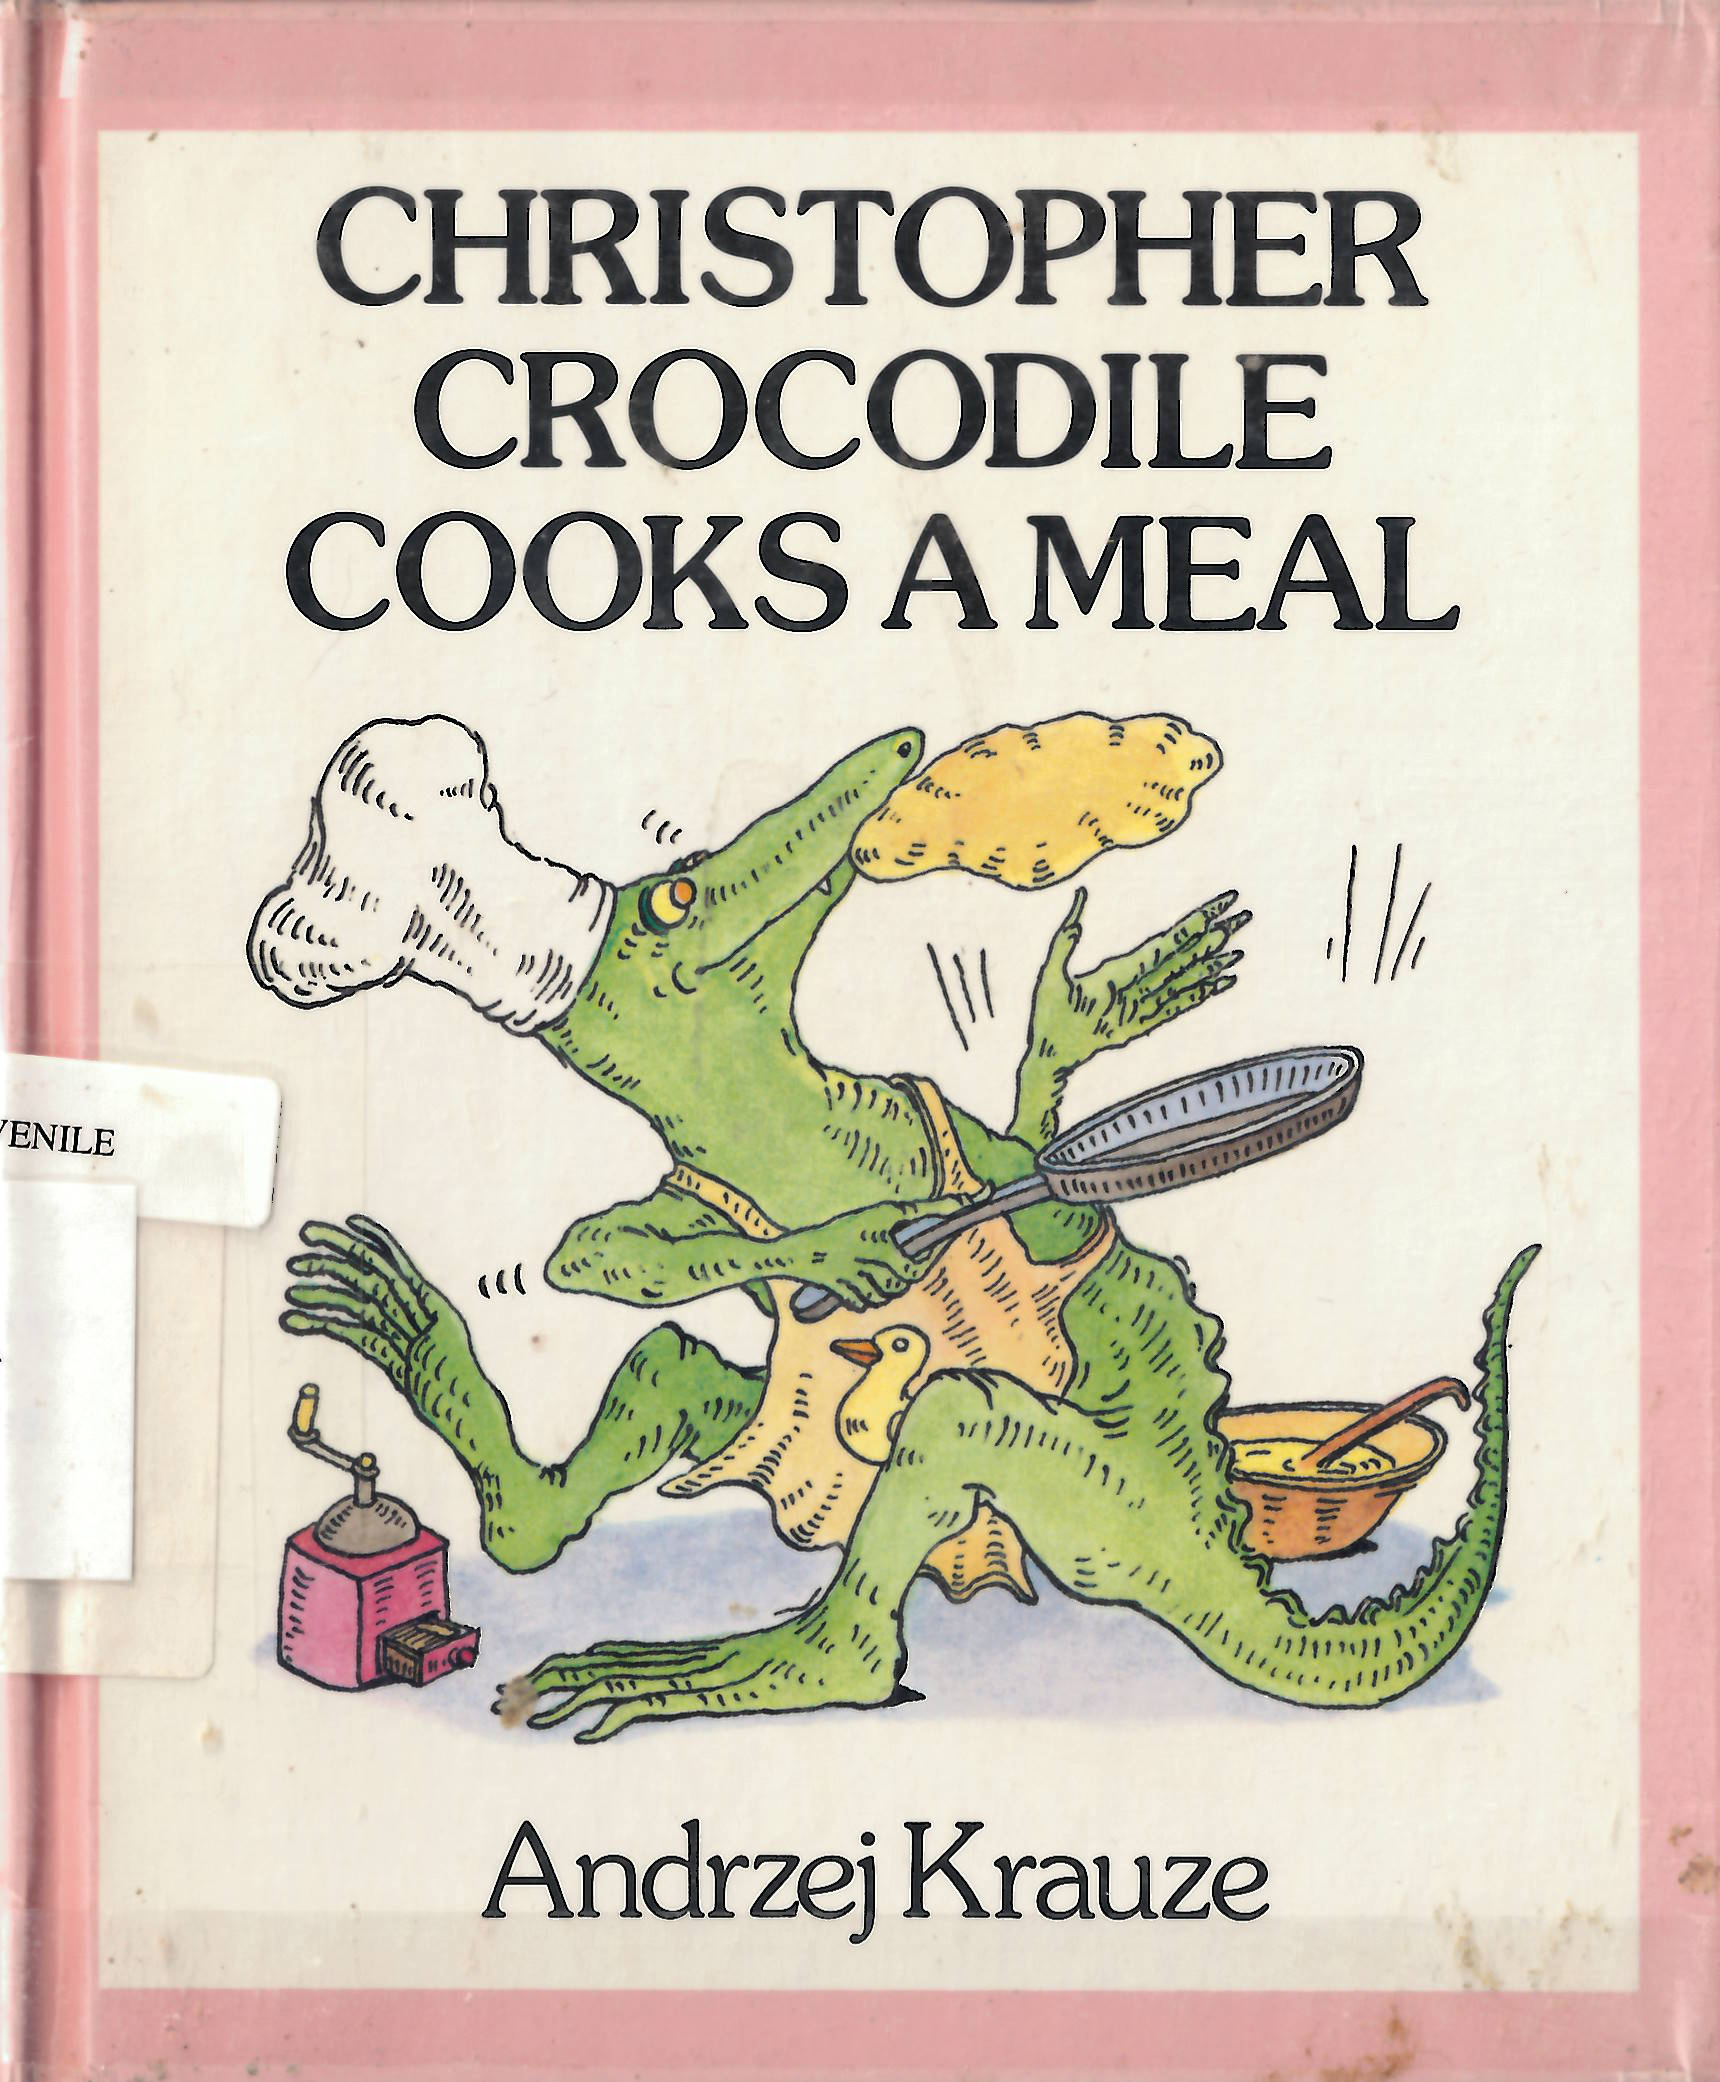 Christopher crocodile cooks a meal